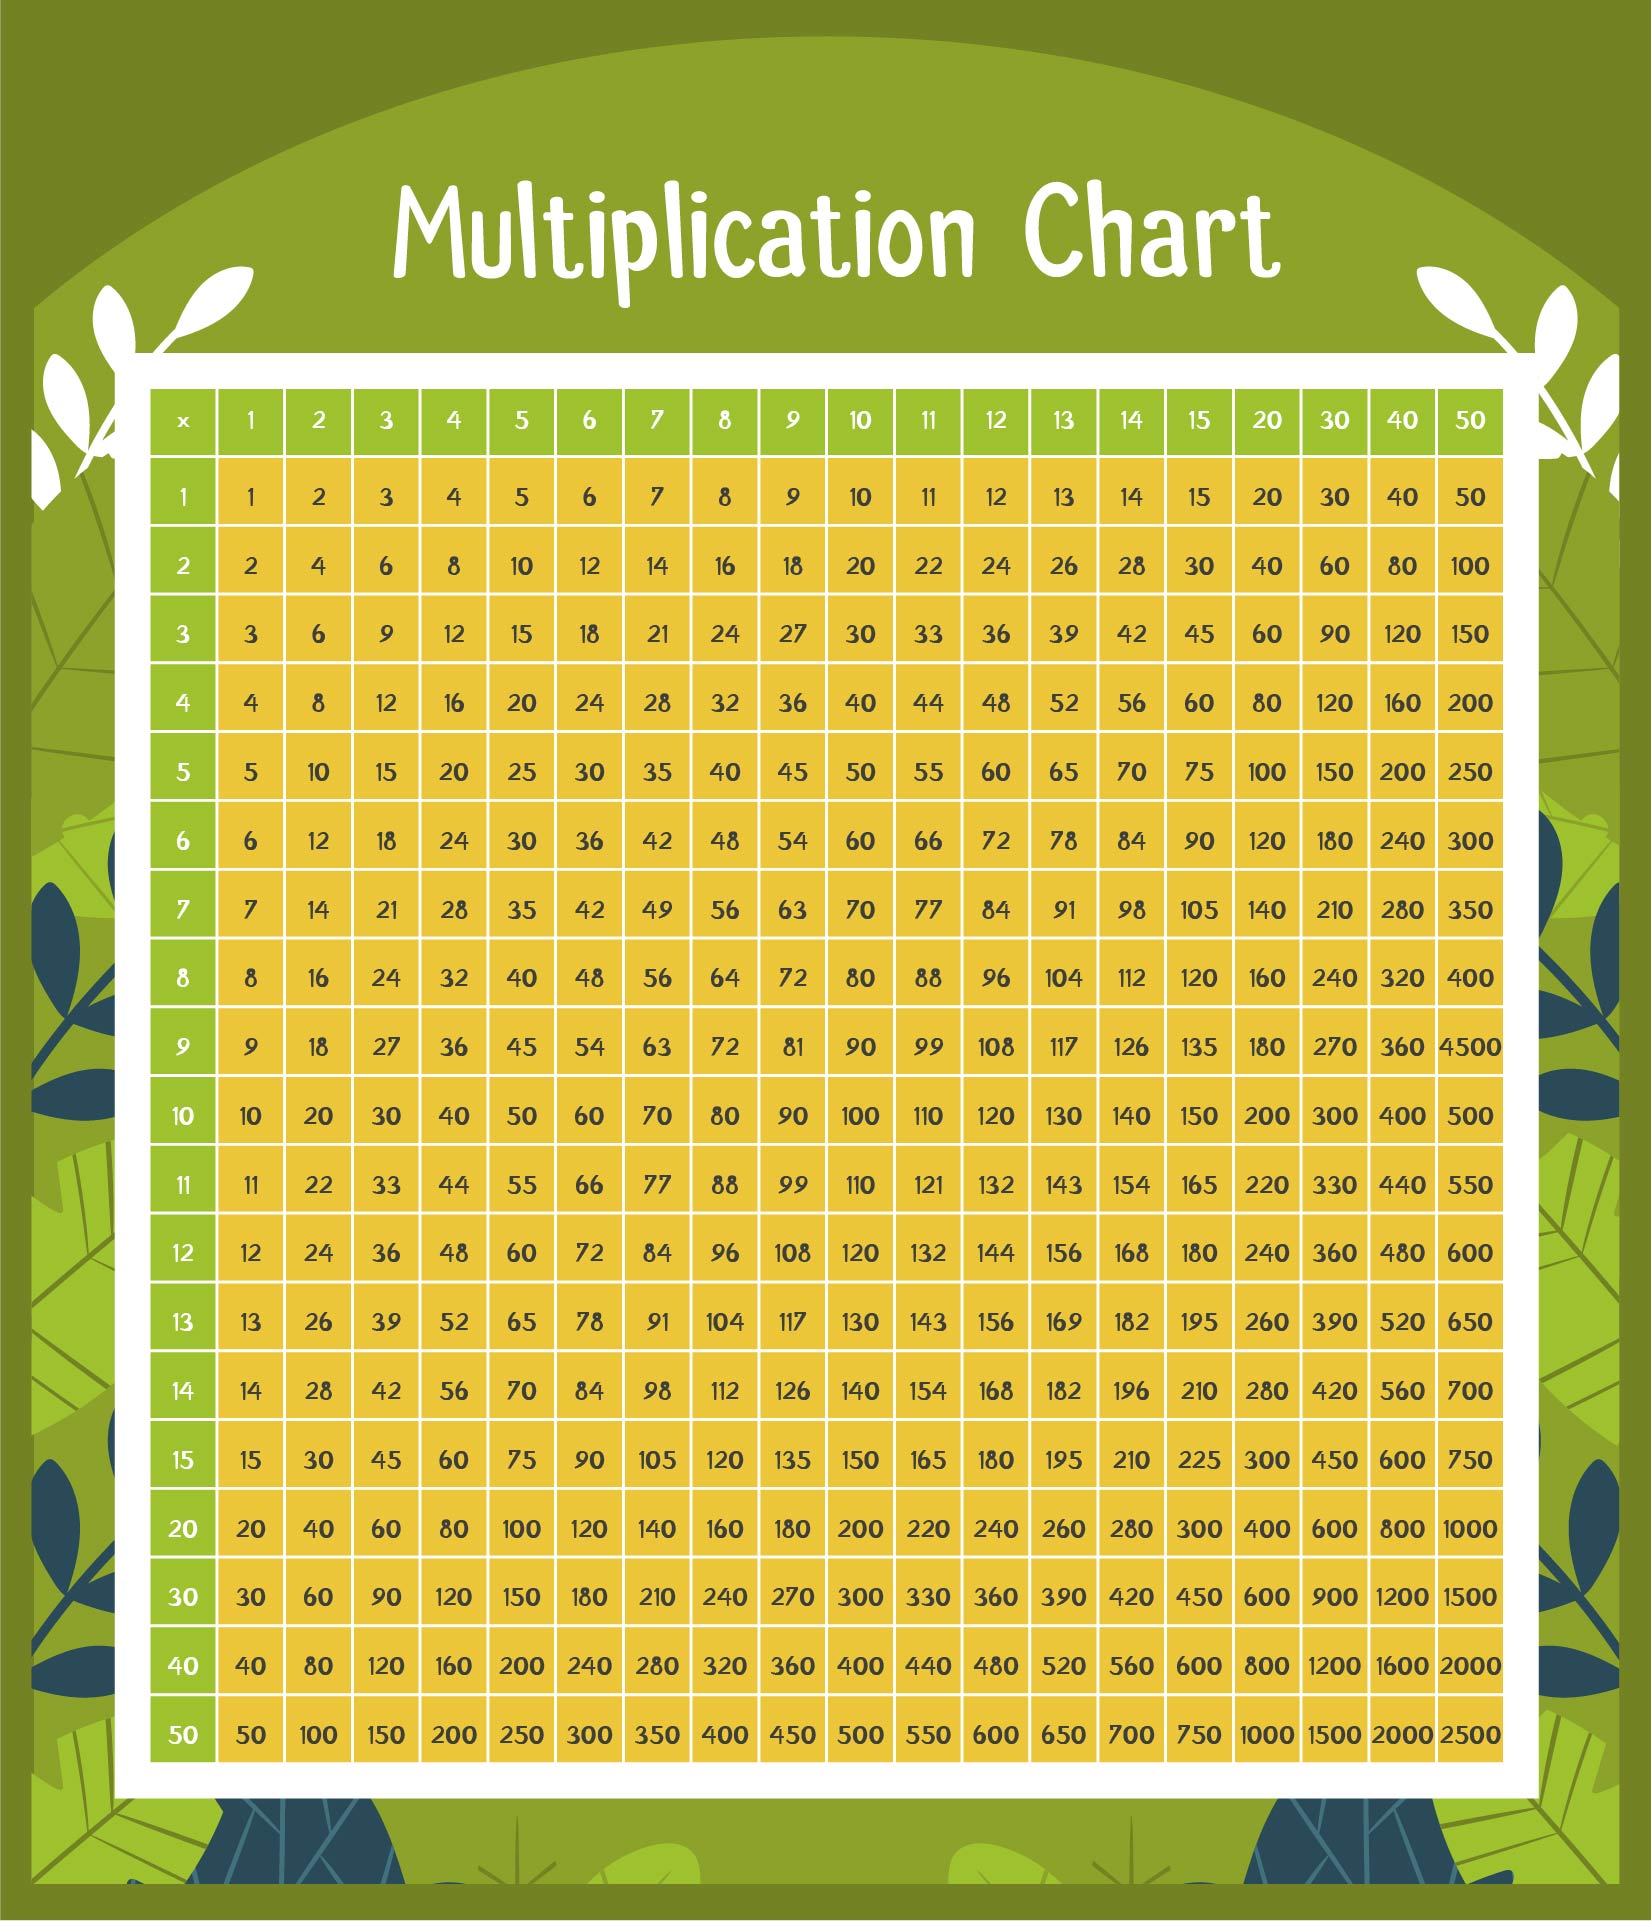 Multiplication Times Table Chart Up to 100